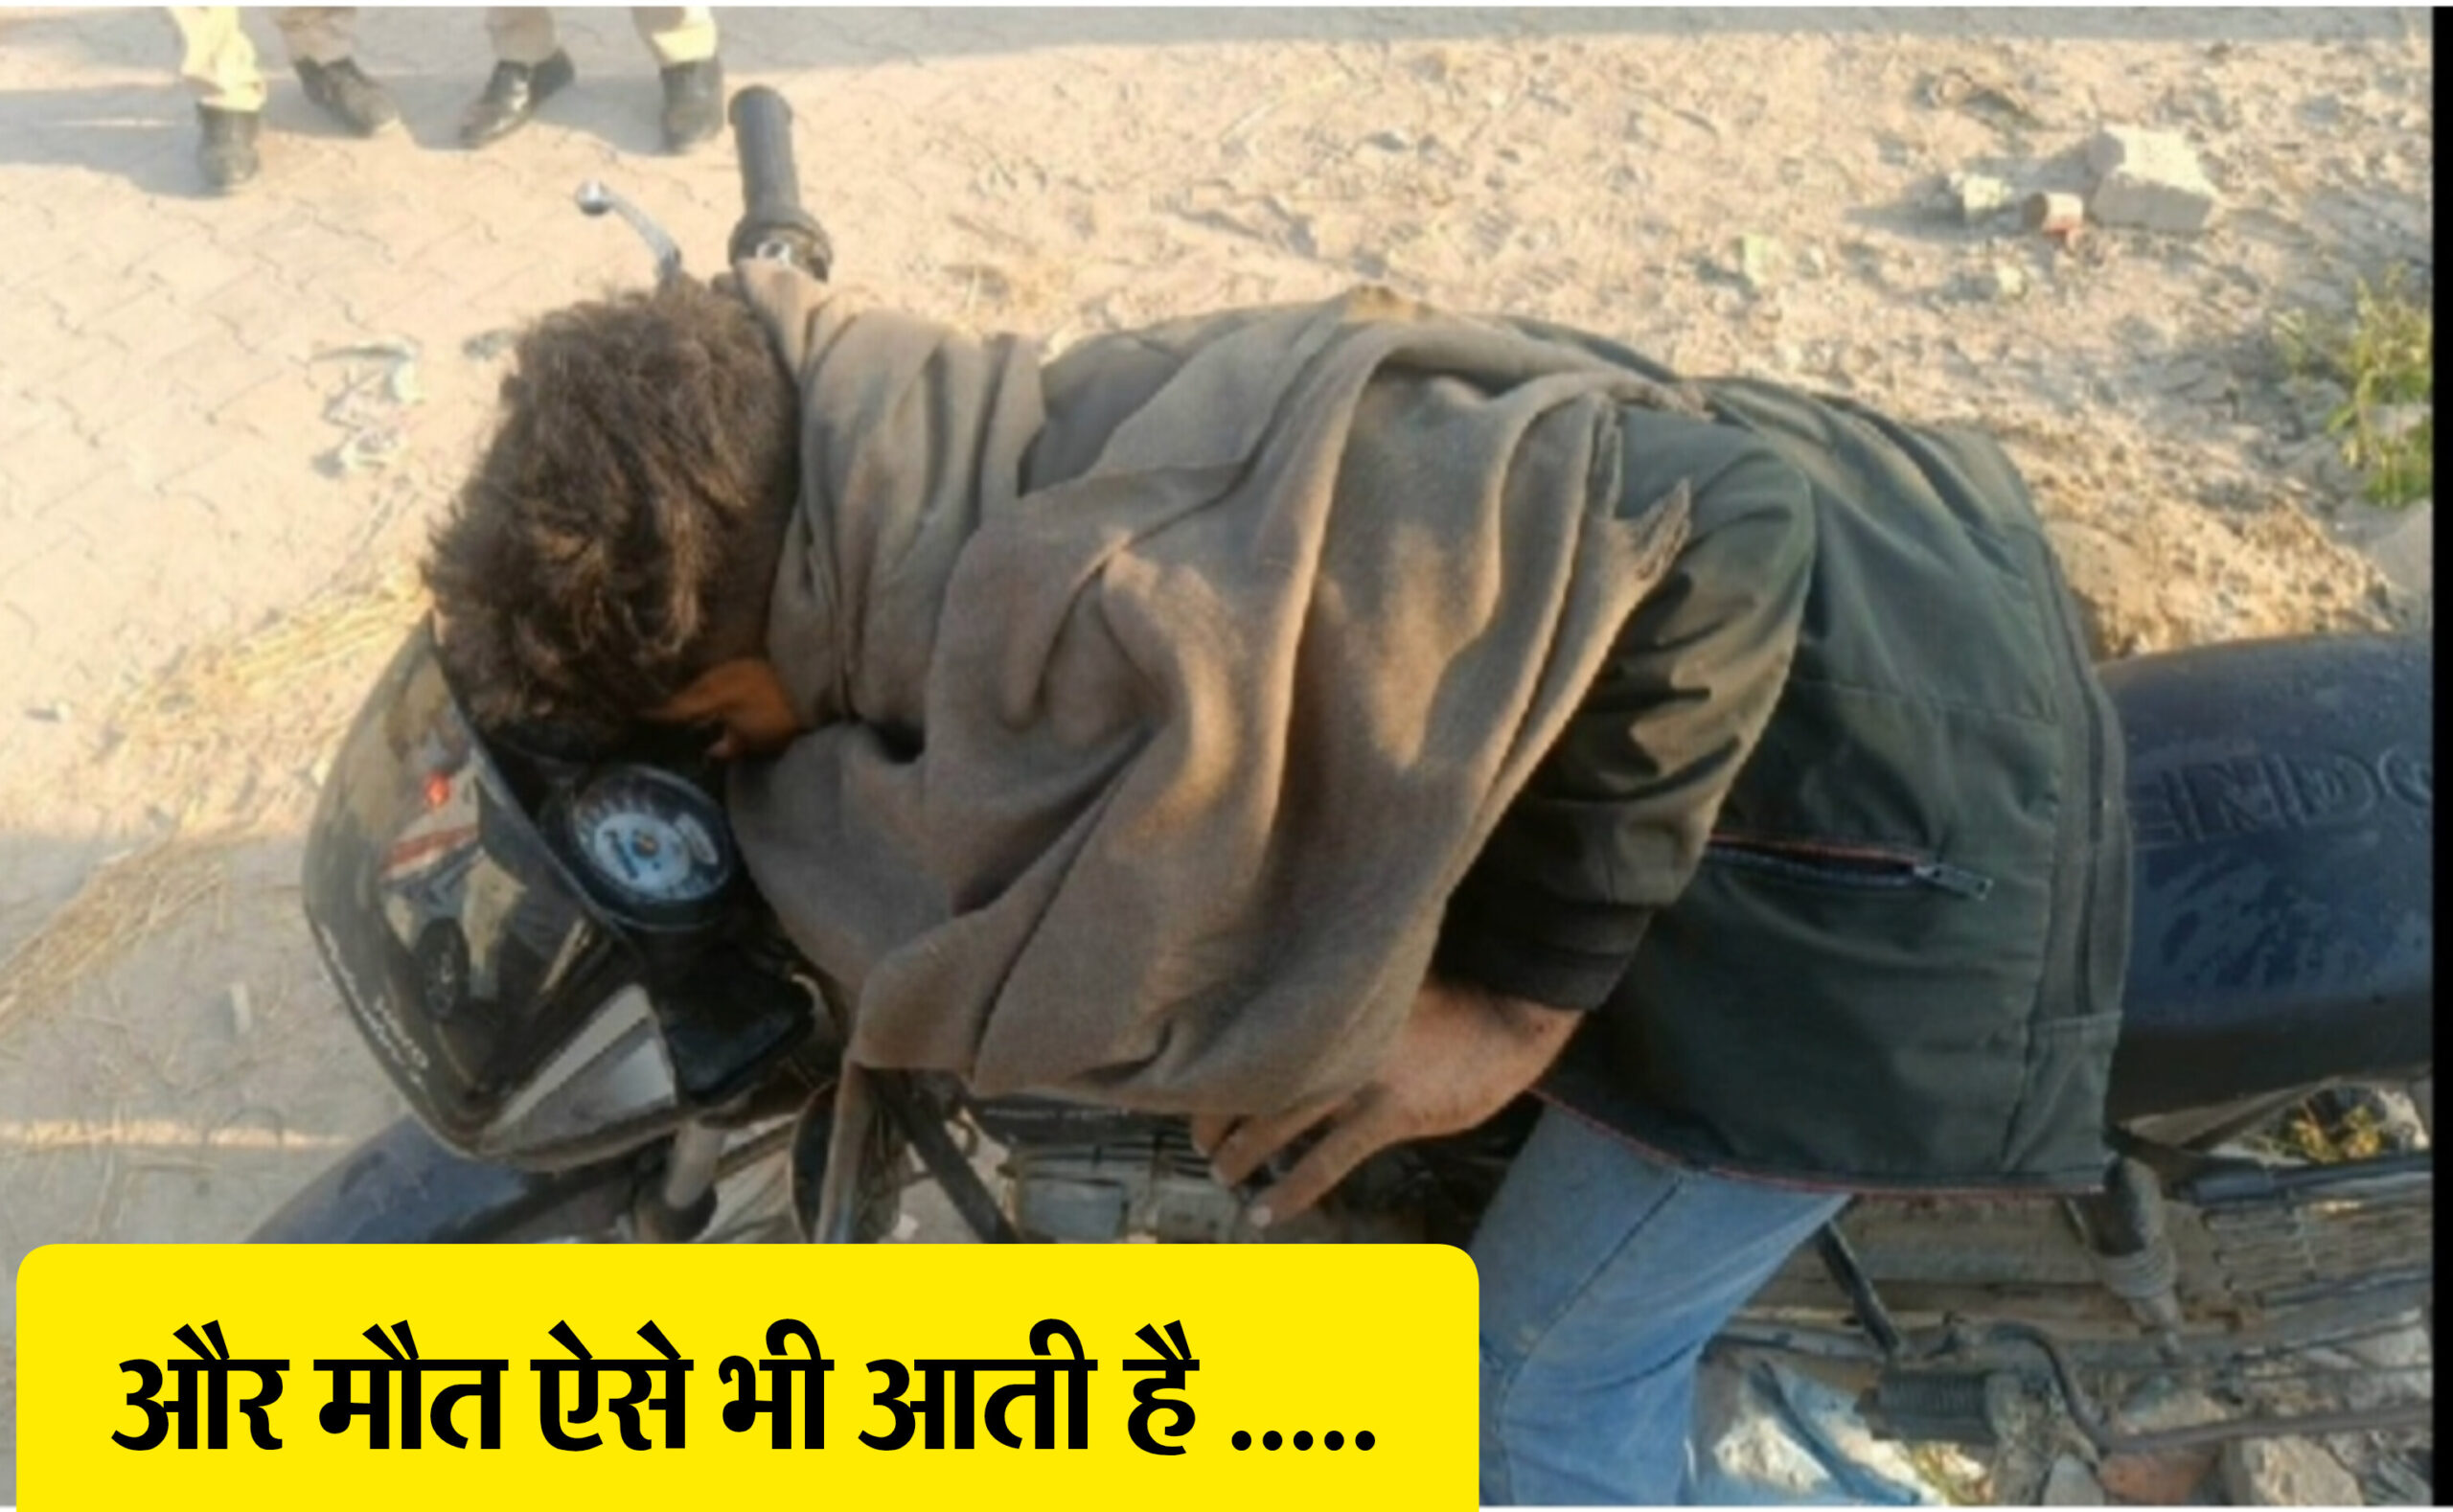 Jind news: ..Death comes like this also, a young man died while sitting on a bike, people did not notice